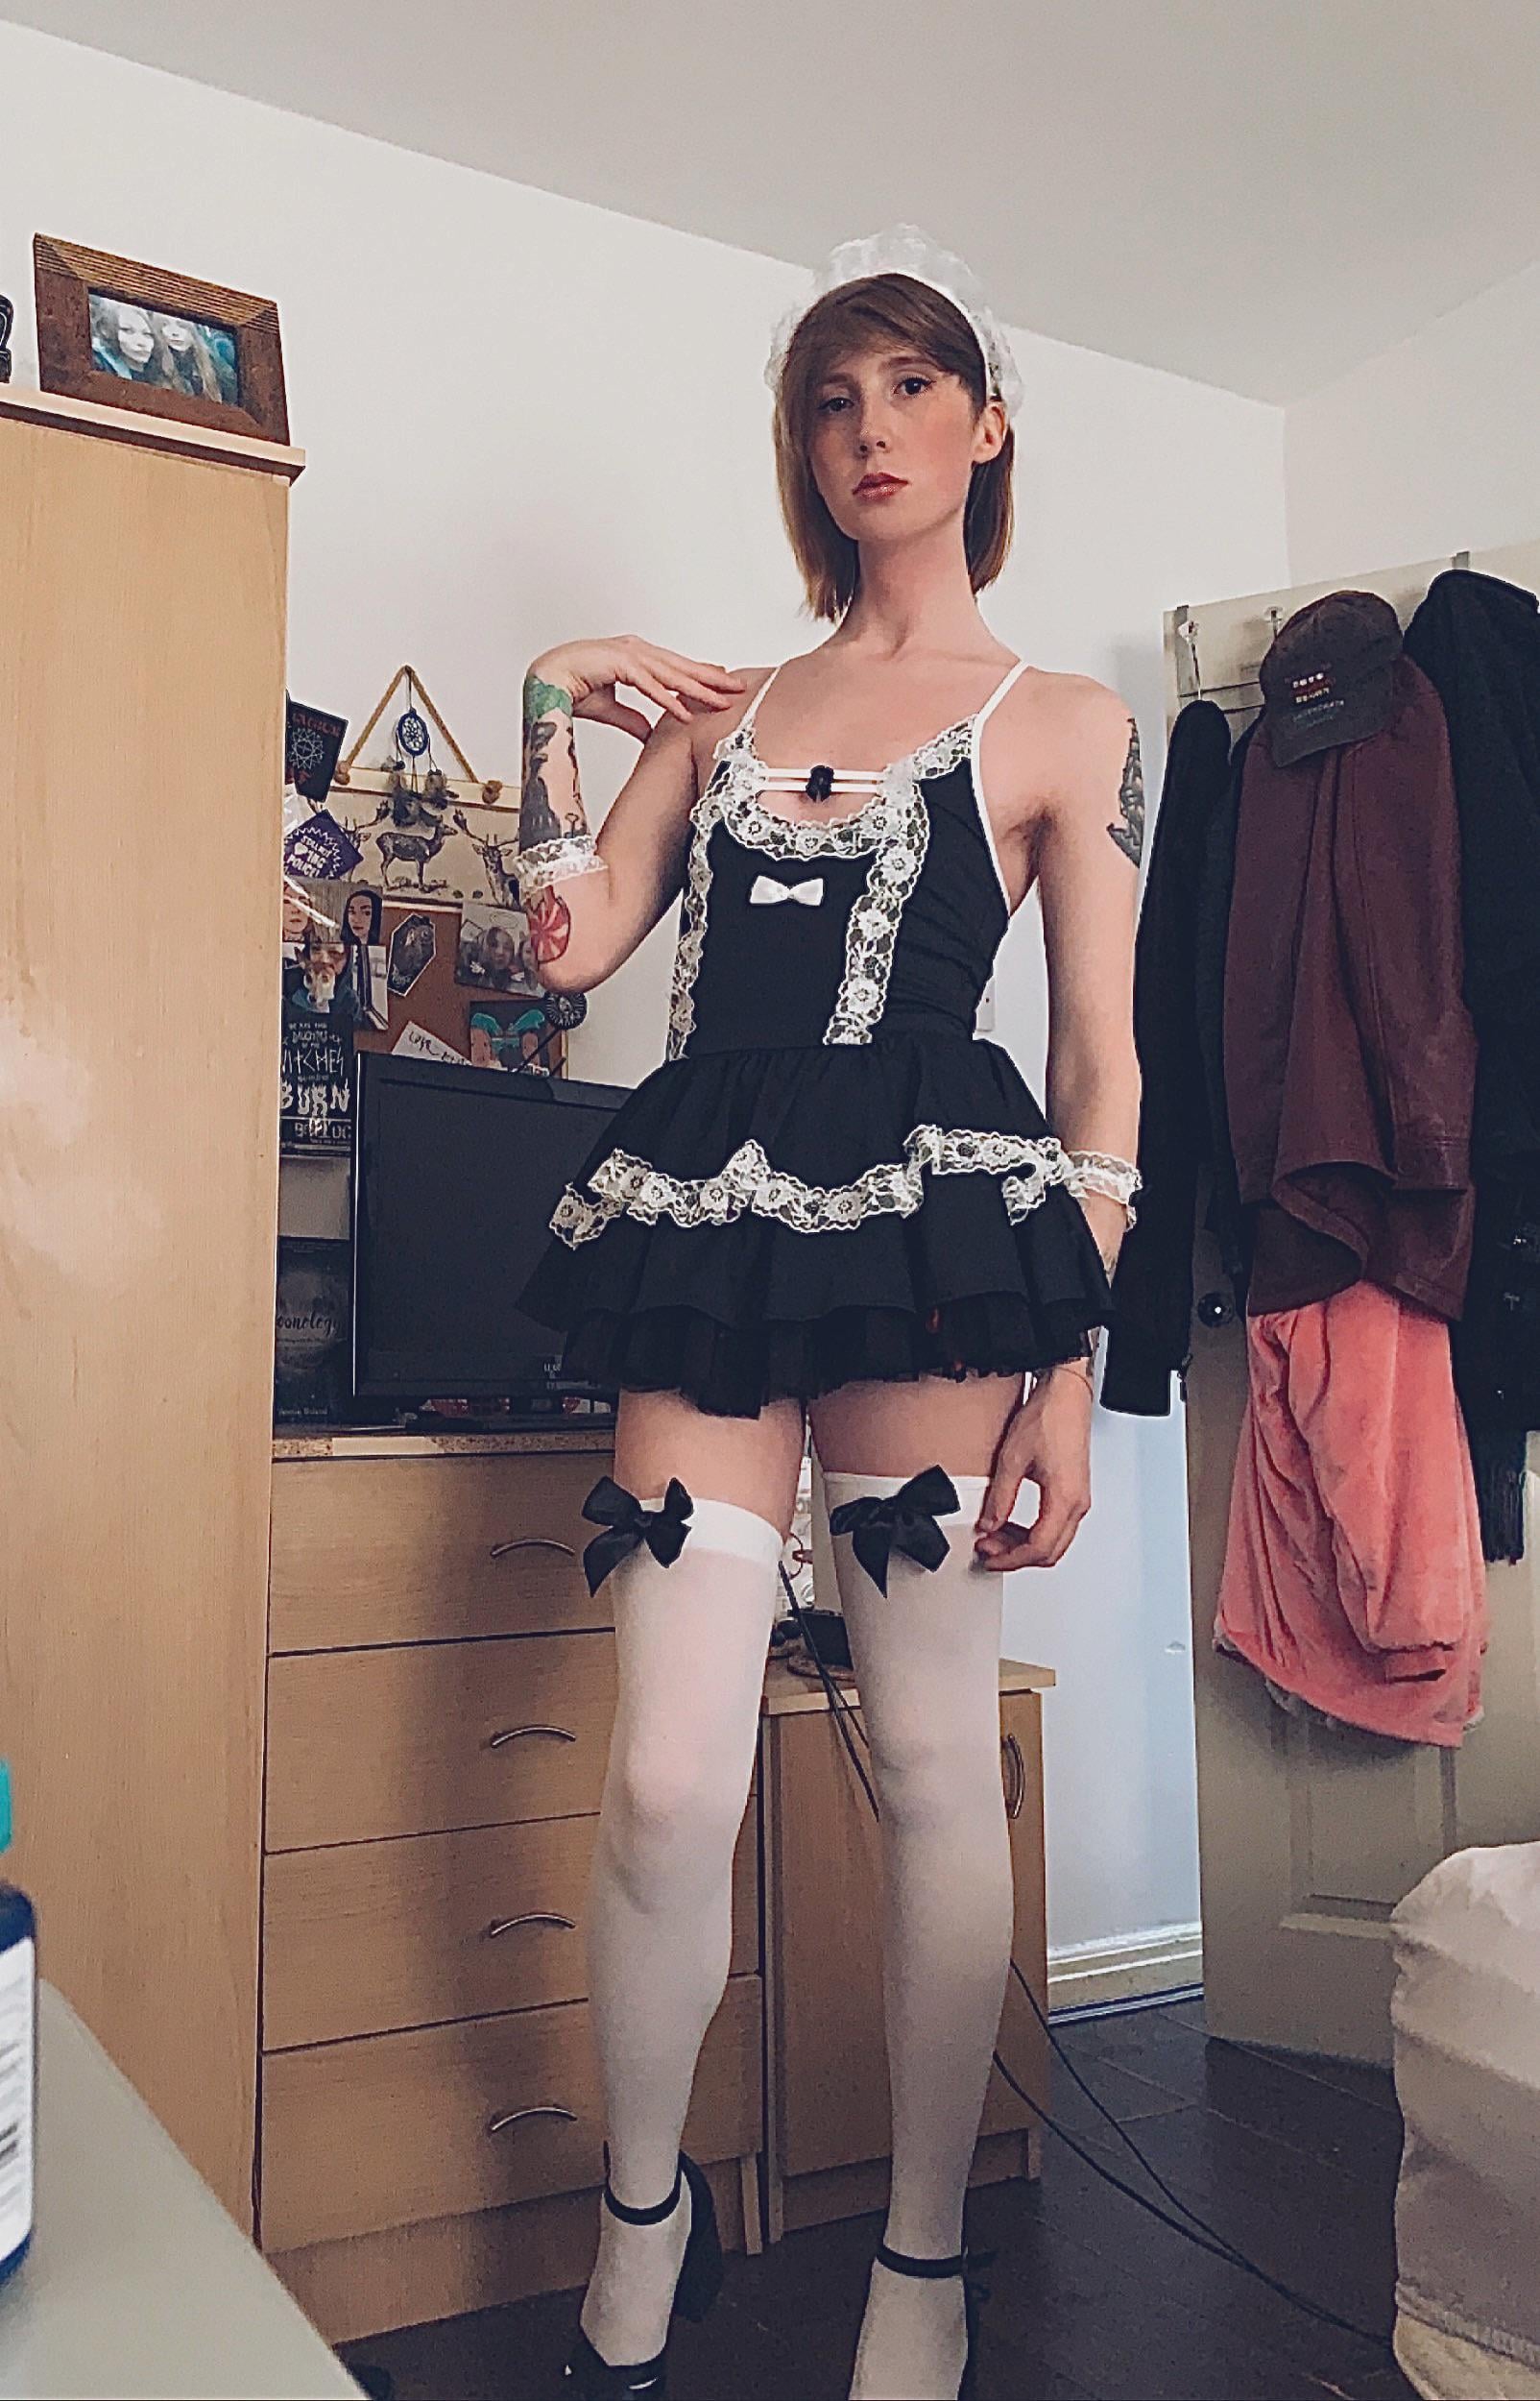 My ex girlfriend made me dress in her maid outfit